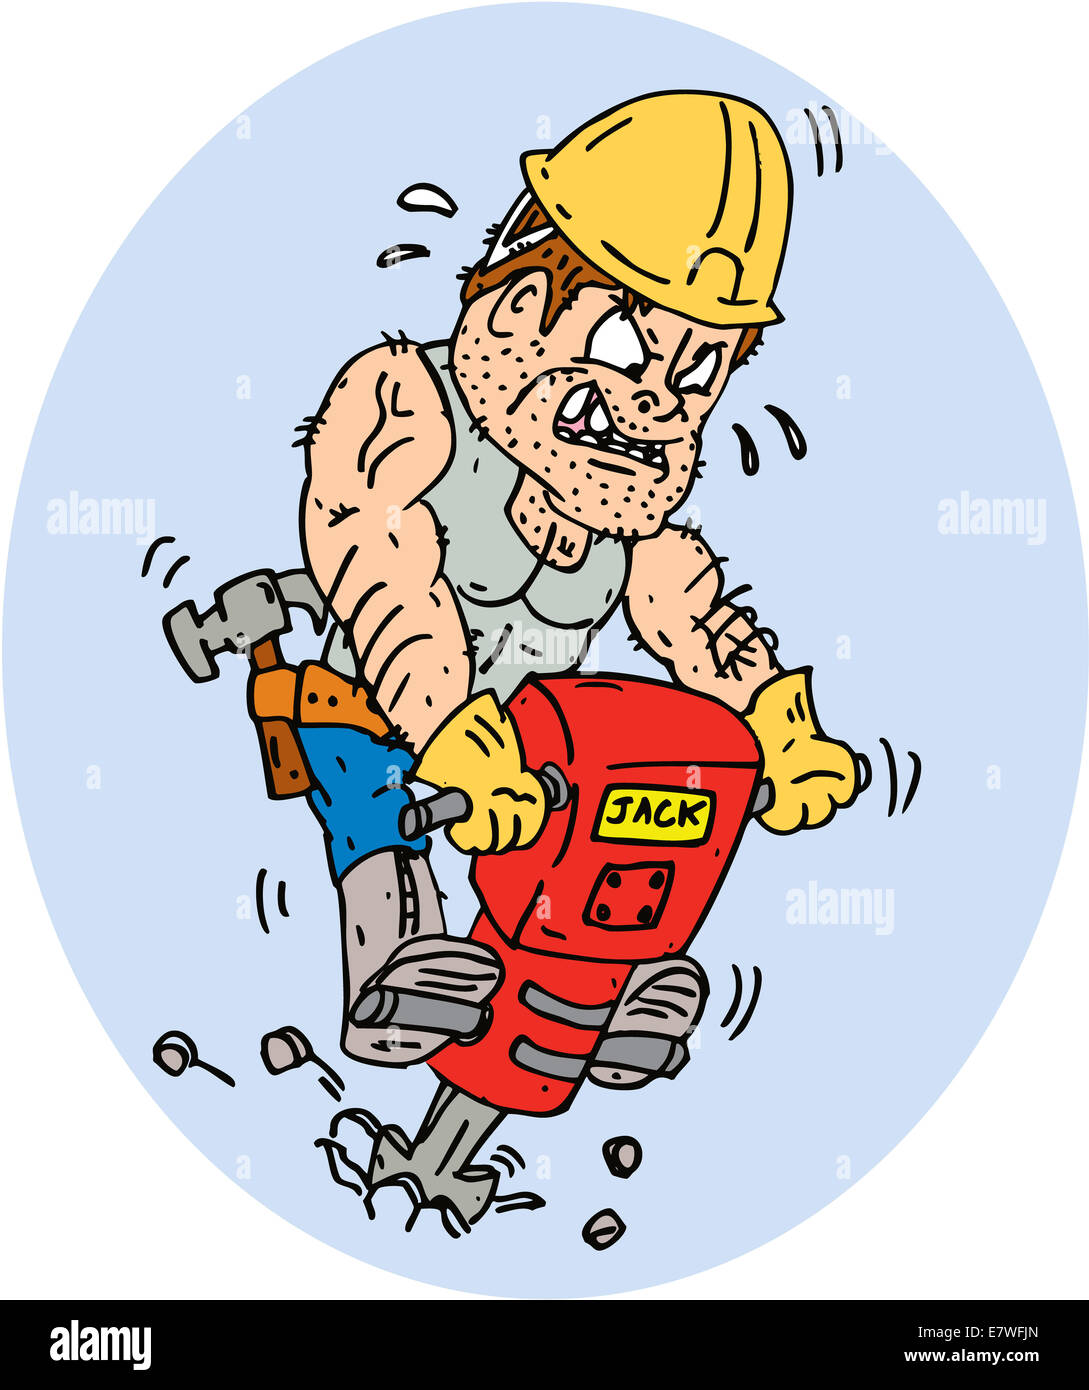 Illustration of a construction worker with jack hammer pneumatic